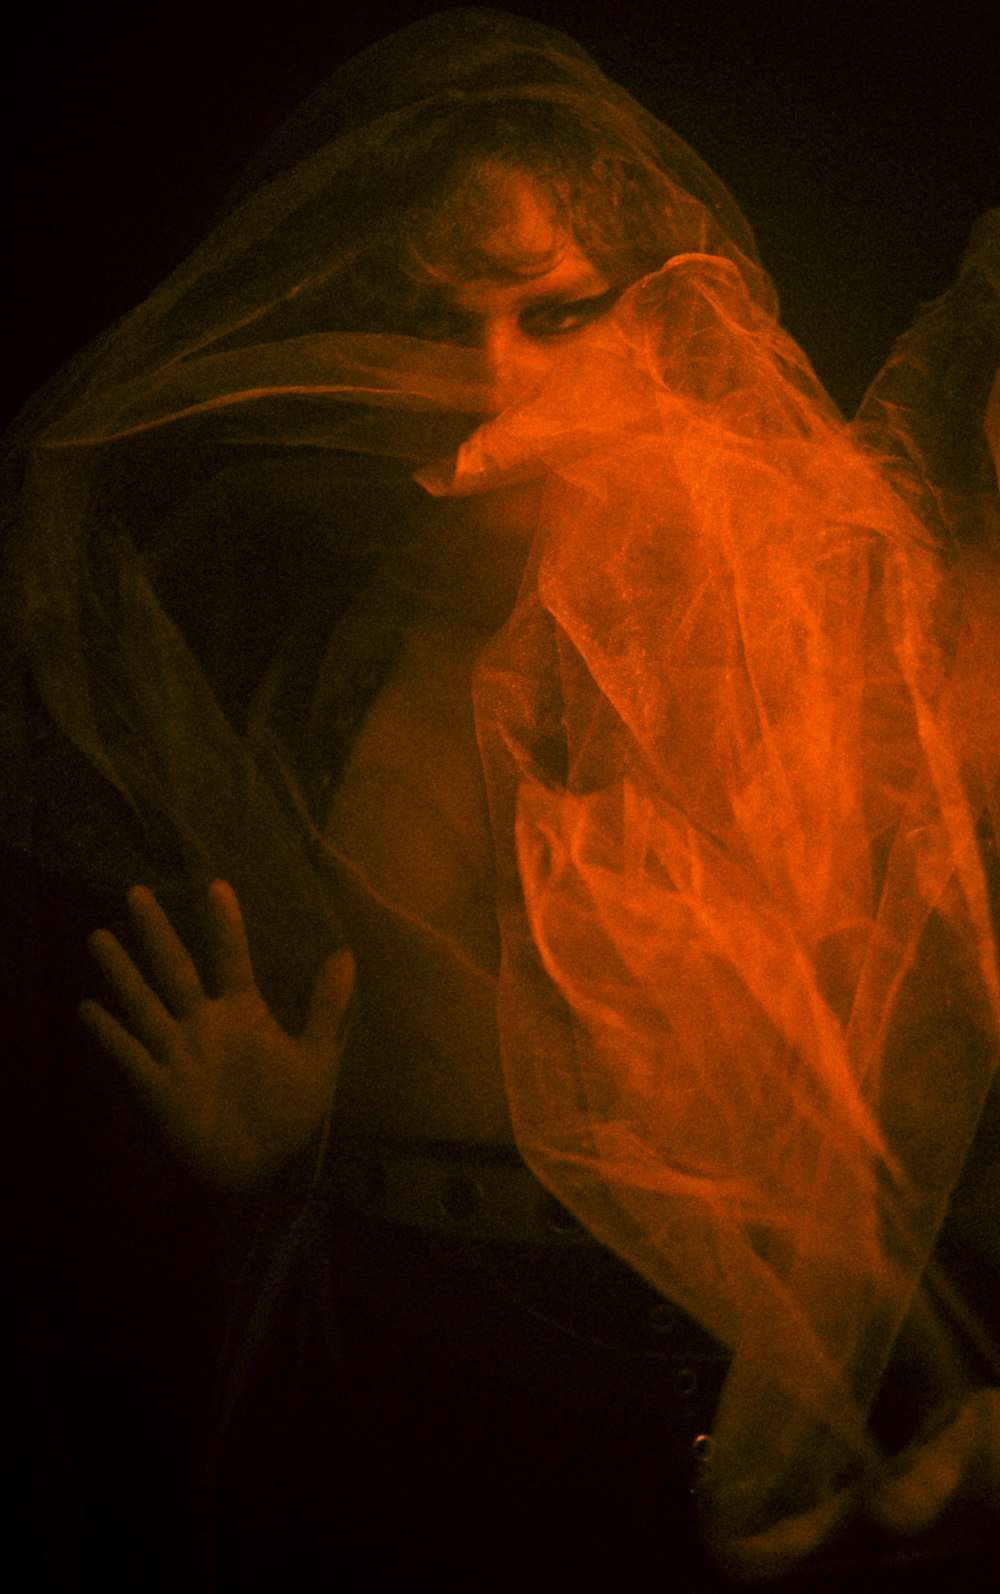 a woman wrapped in a plastic bag in the dark